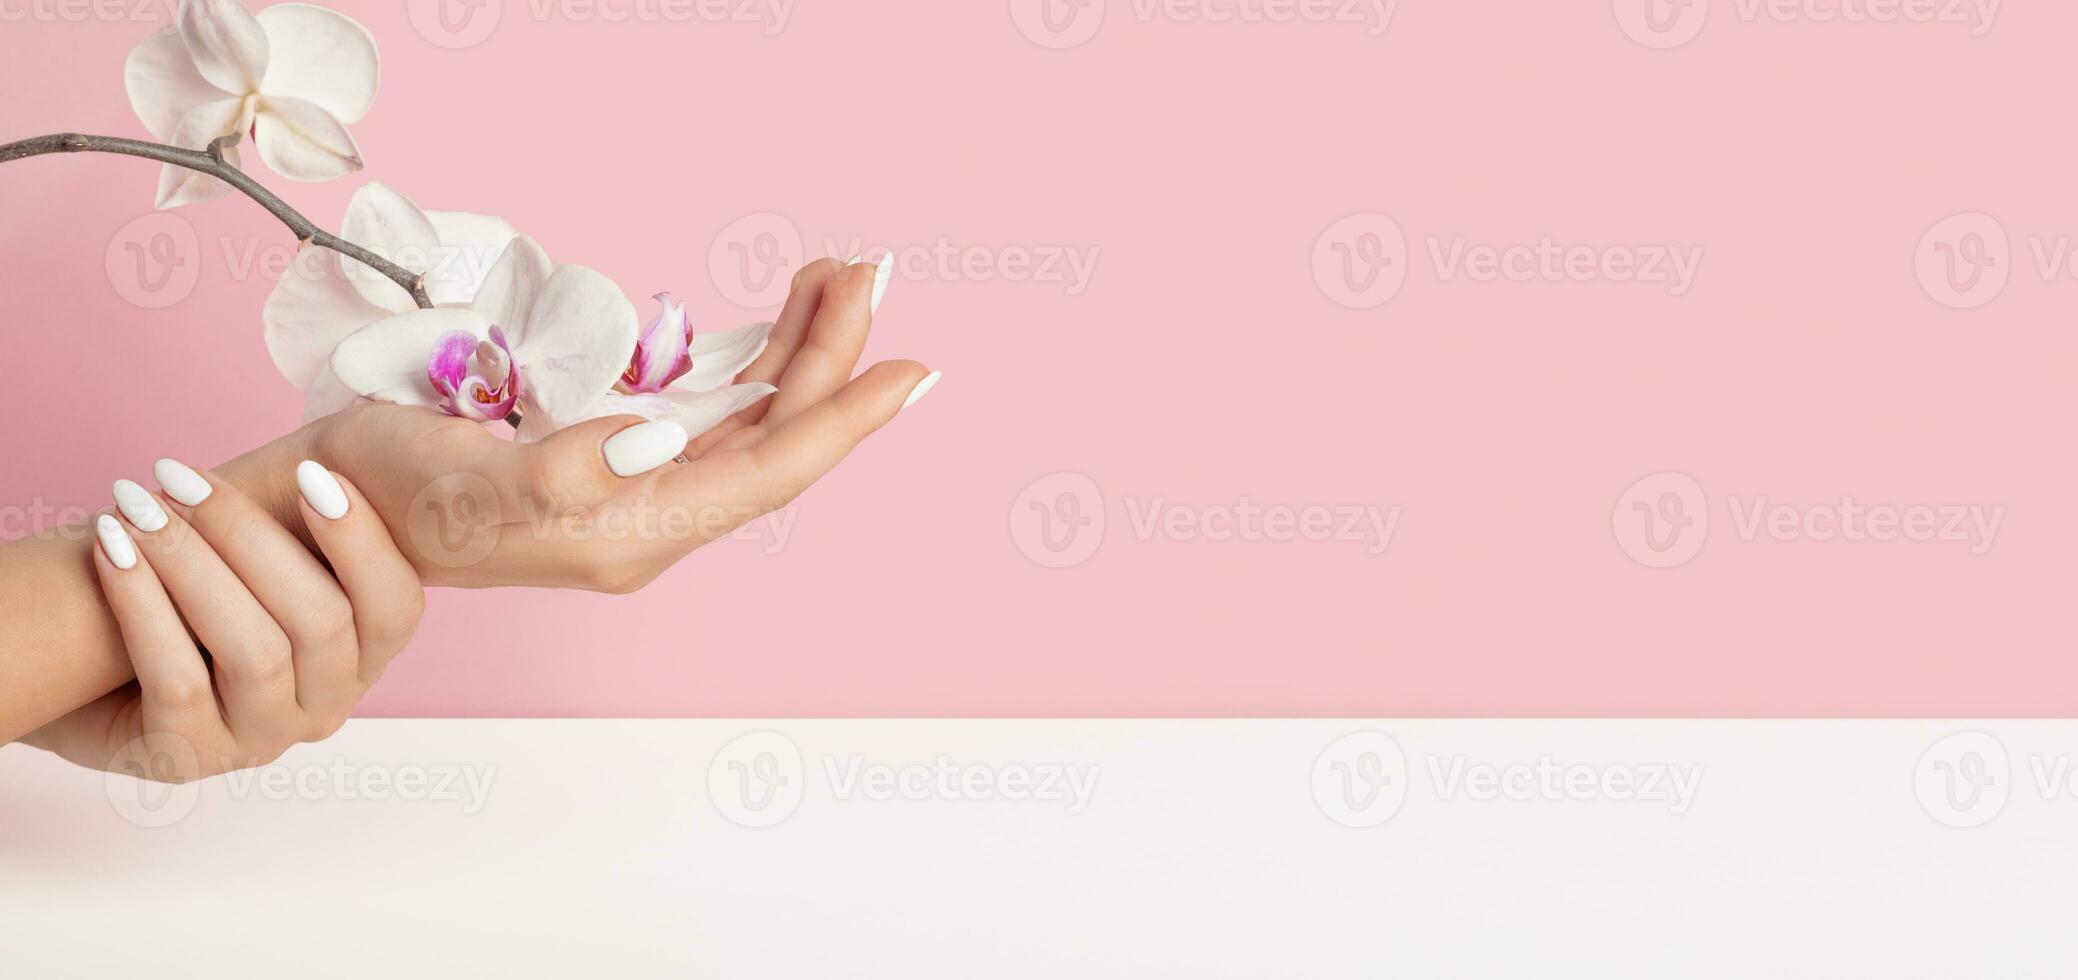 subtle fingers beautiful young woman's hands with white nails on a pink background orchid flowers photo